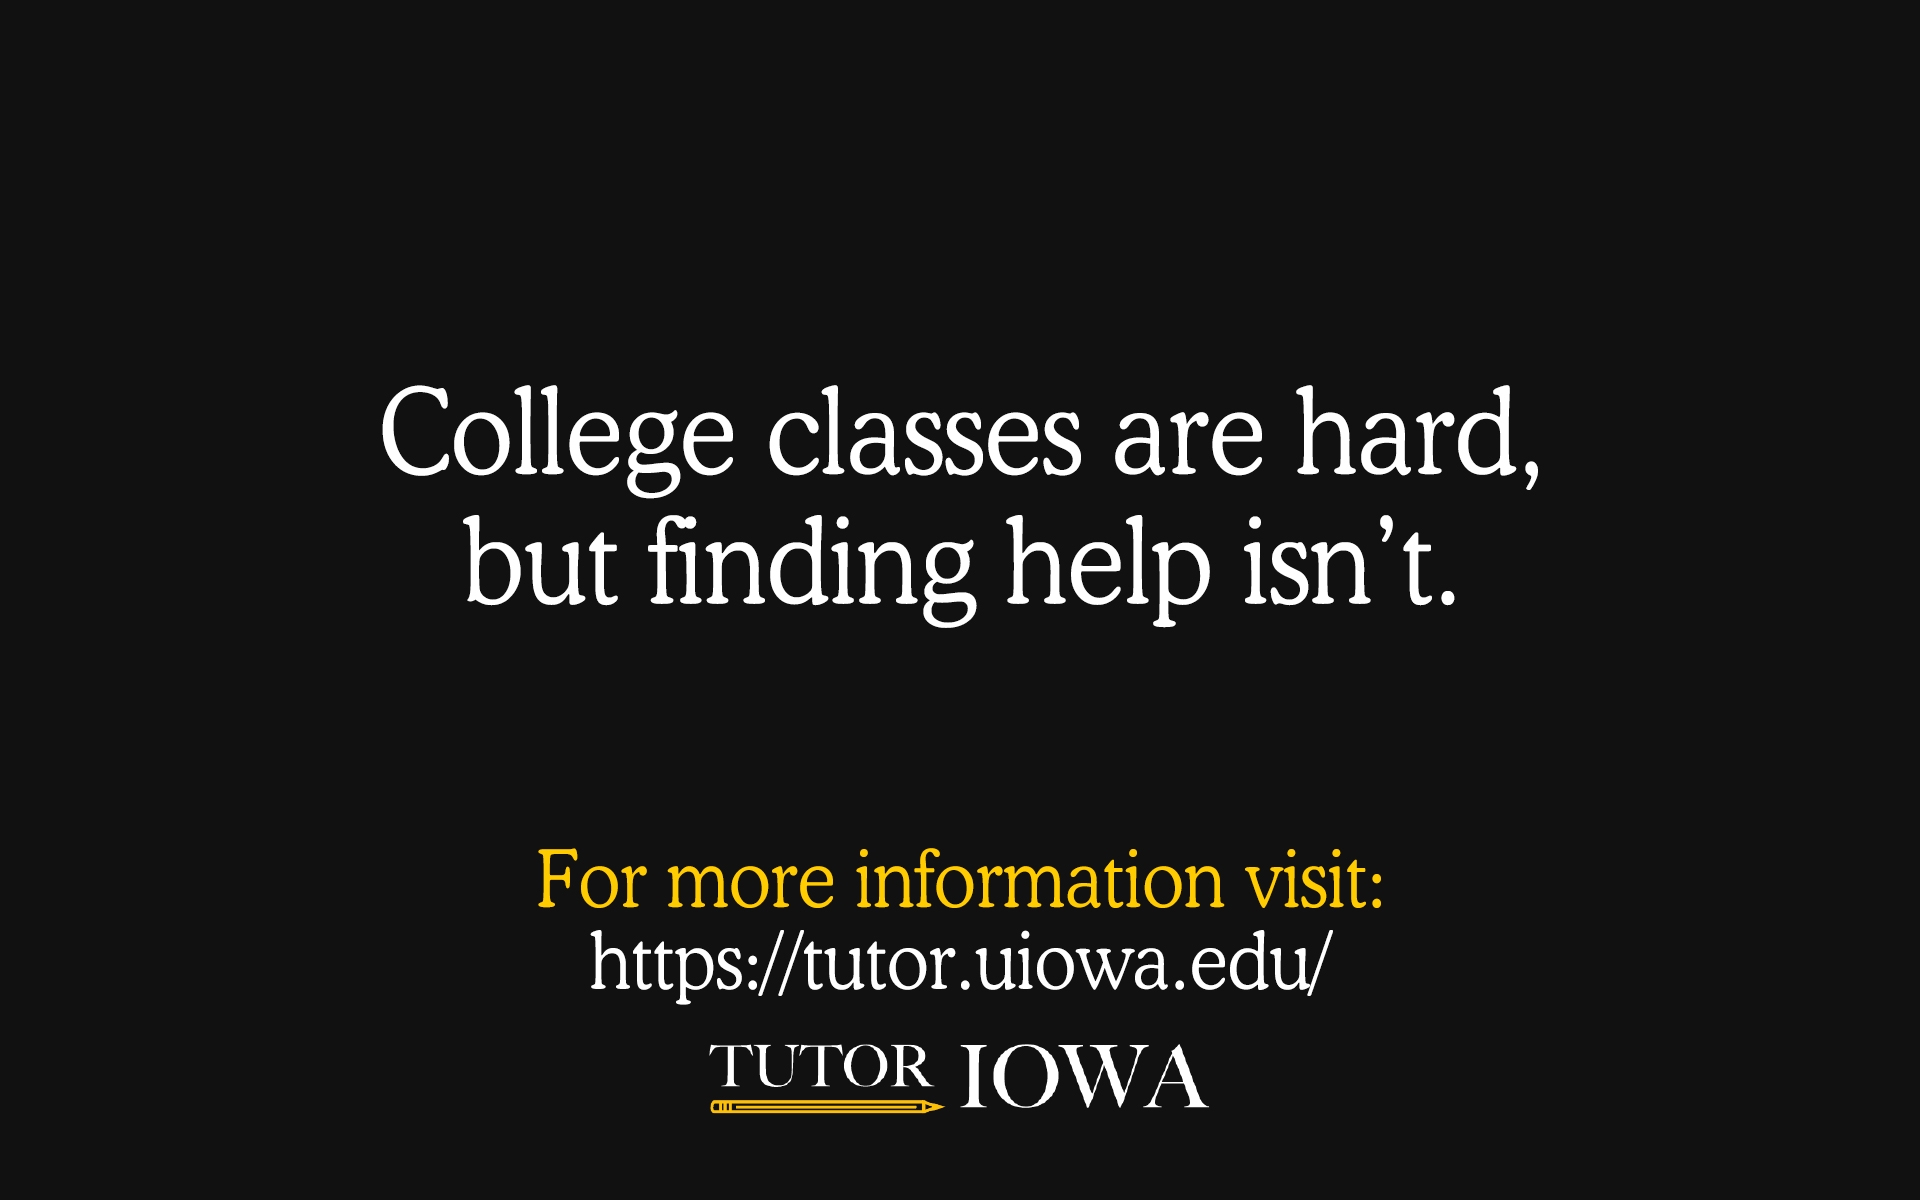 College classes are hard, but finding help isn't. For more information, visit https://tutor.uiowa.edu.